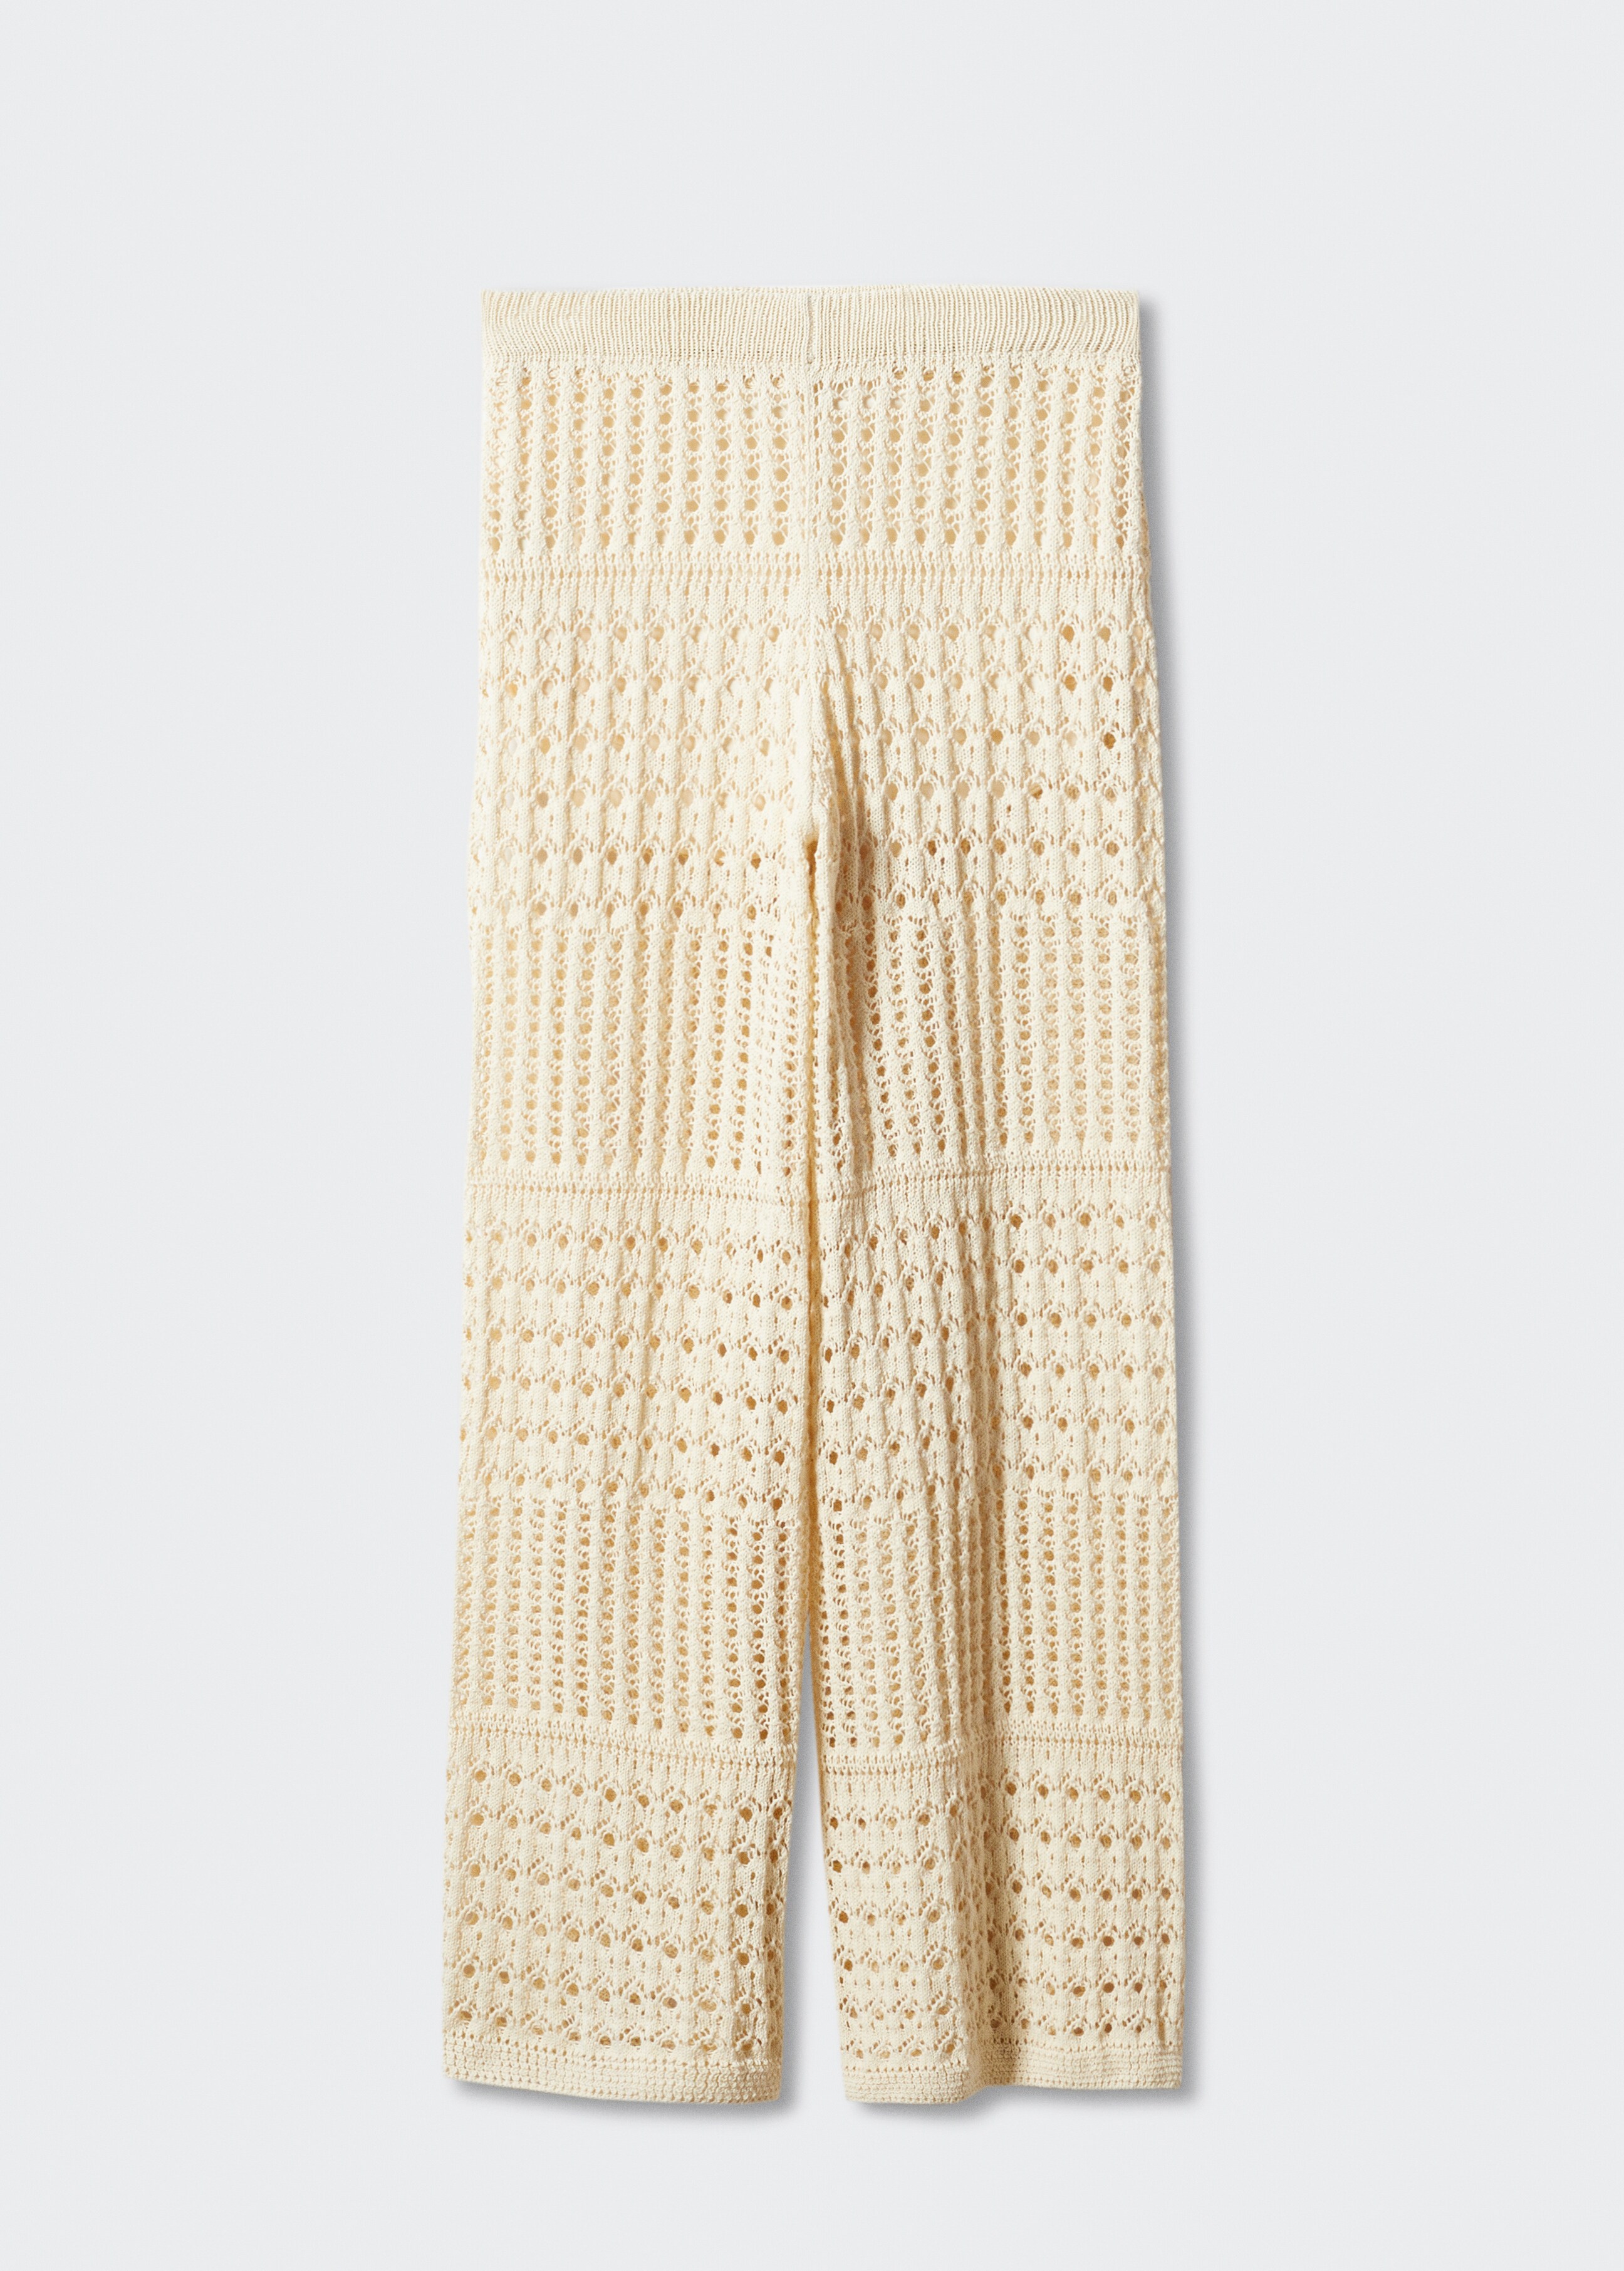 Openwork knitted palazzo pants - Article without model